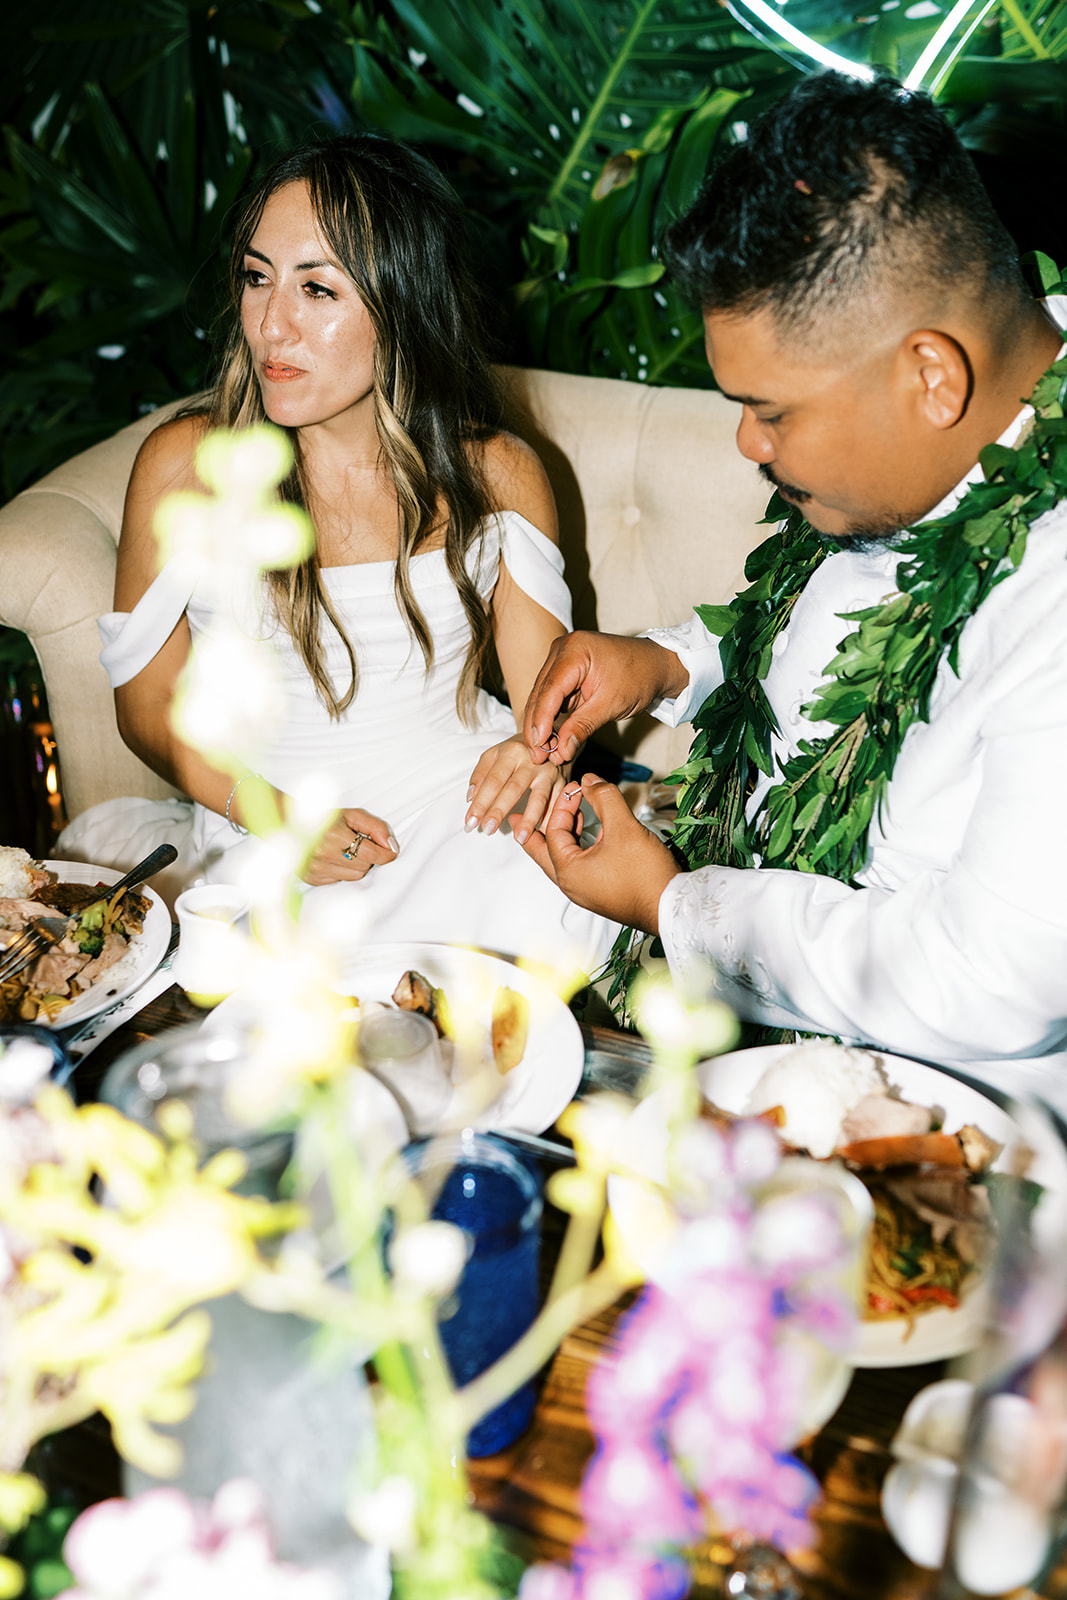 A bride sitting at a dinner table looks on as the groom, adorned with a lei, appears to be adjusting her wedding ring